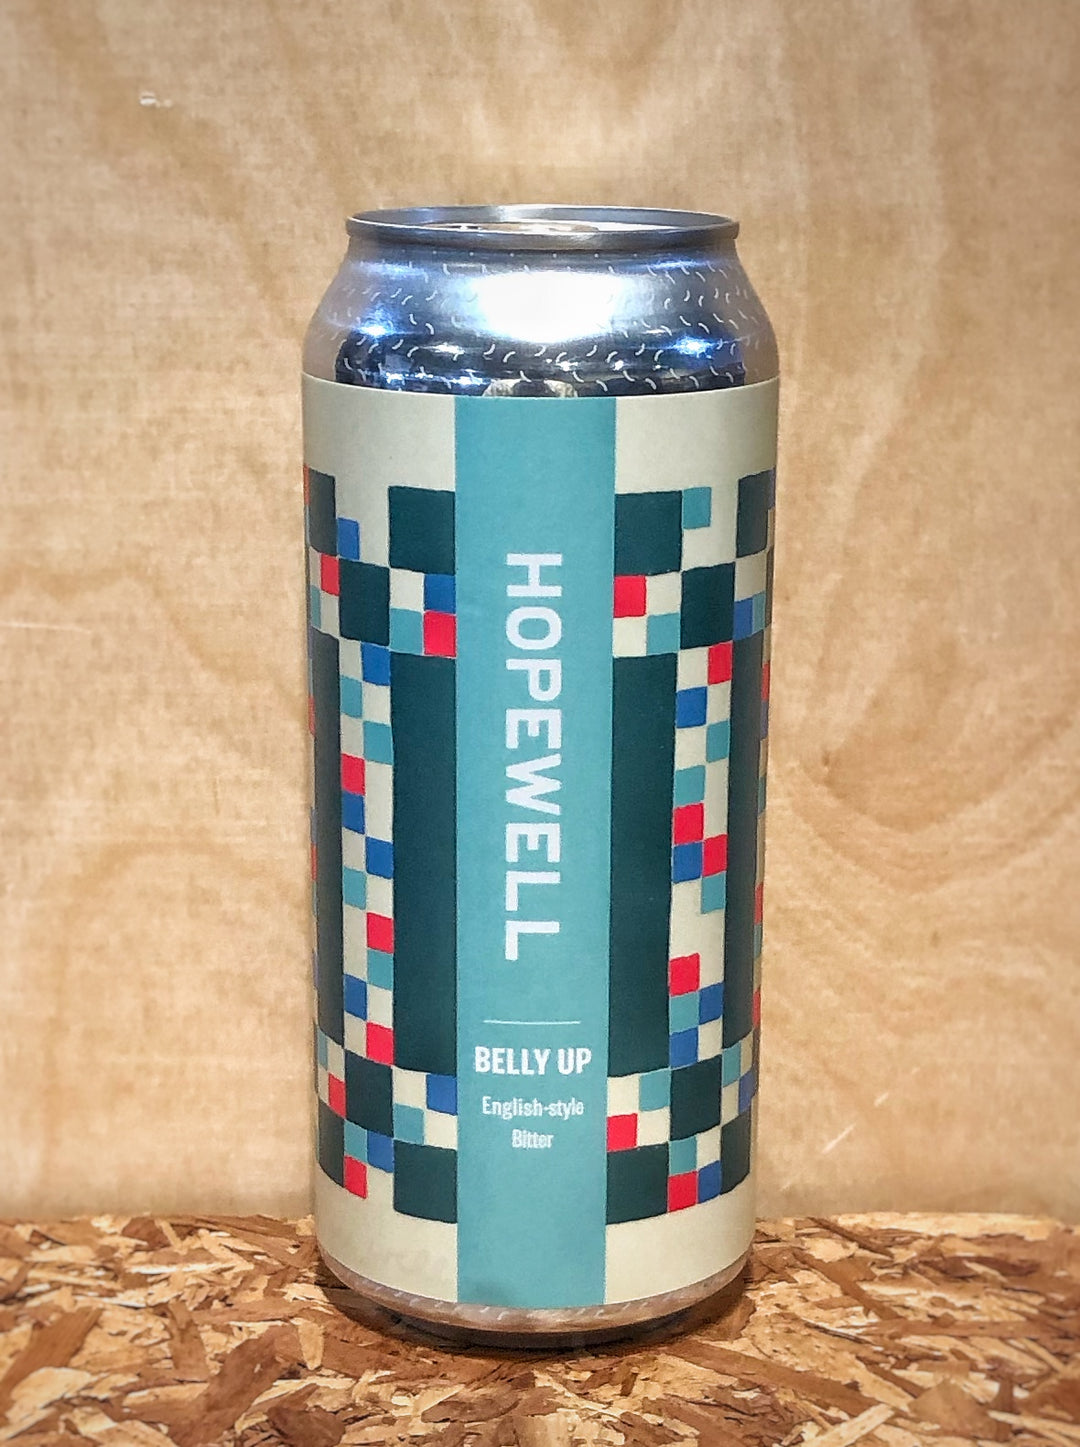 Hopewell 'Belly Up' English Style Bitter (Chicago, IL)